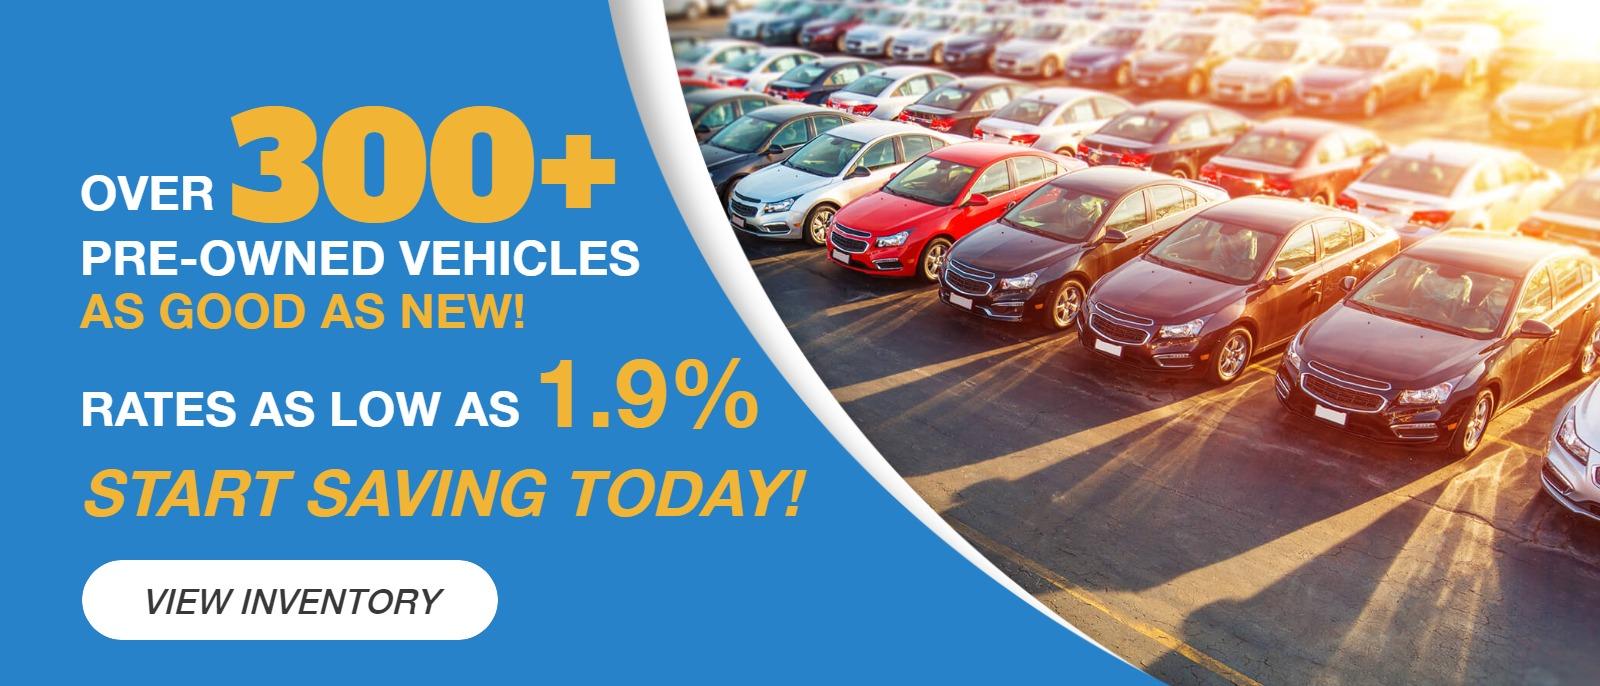 Over 300+ Pre-owned vehicles as good as new!
Rates as low as 1.9%
Start Saving Today!